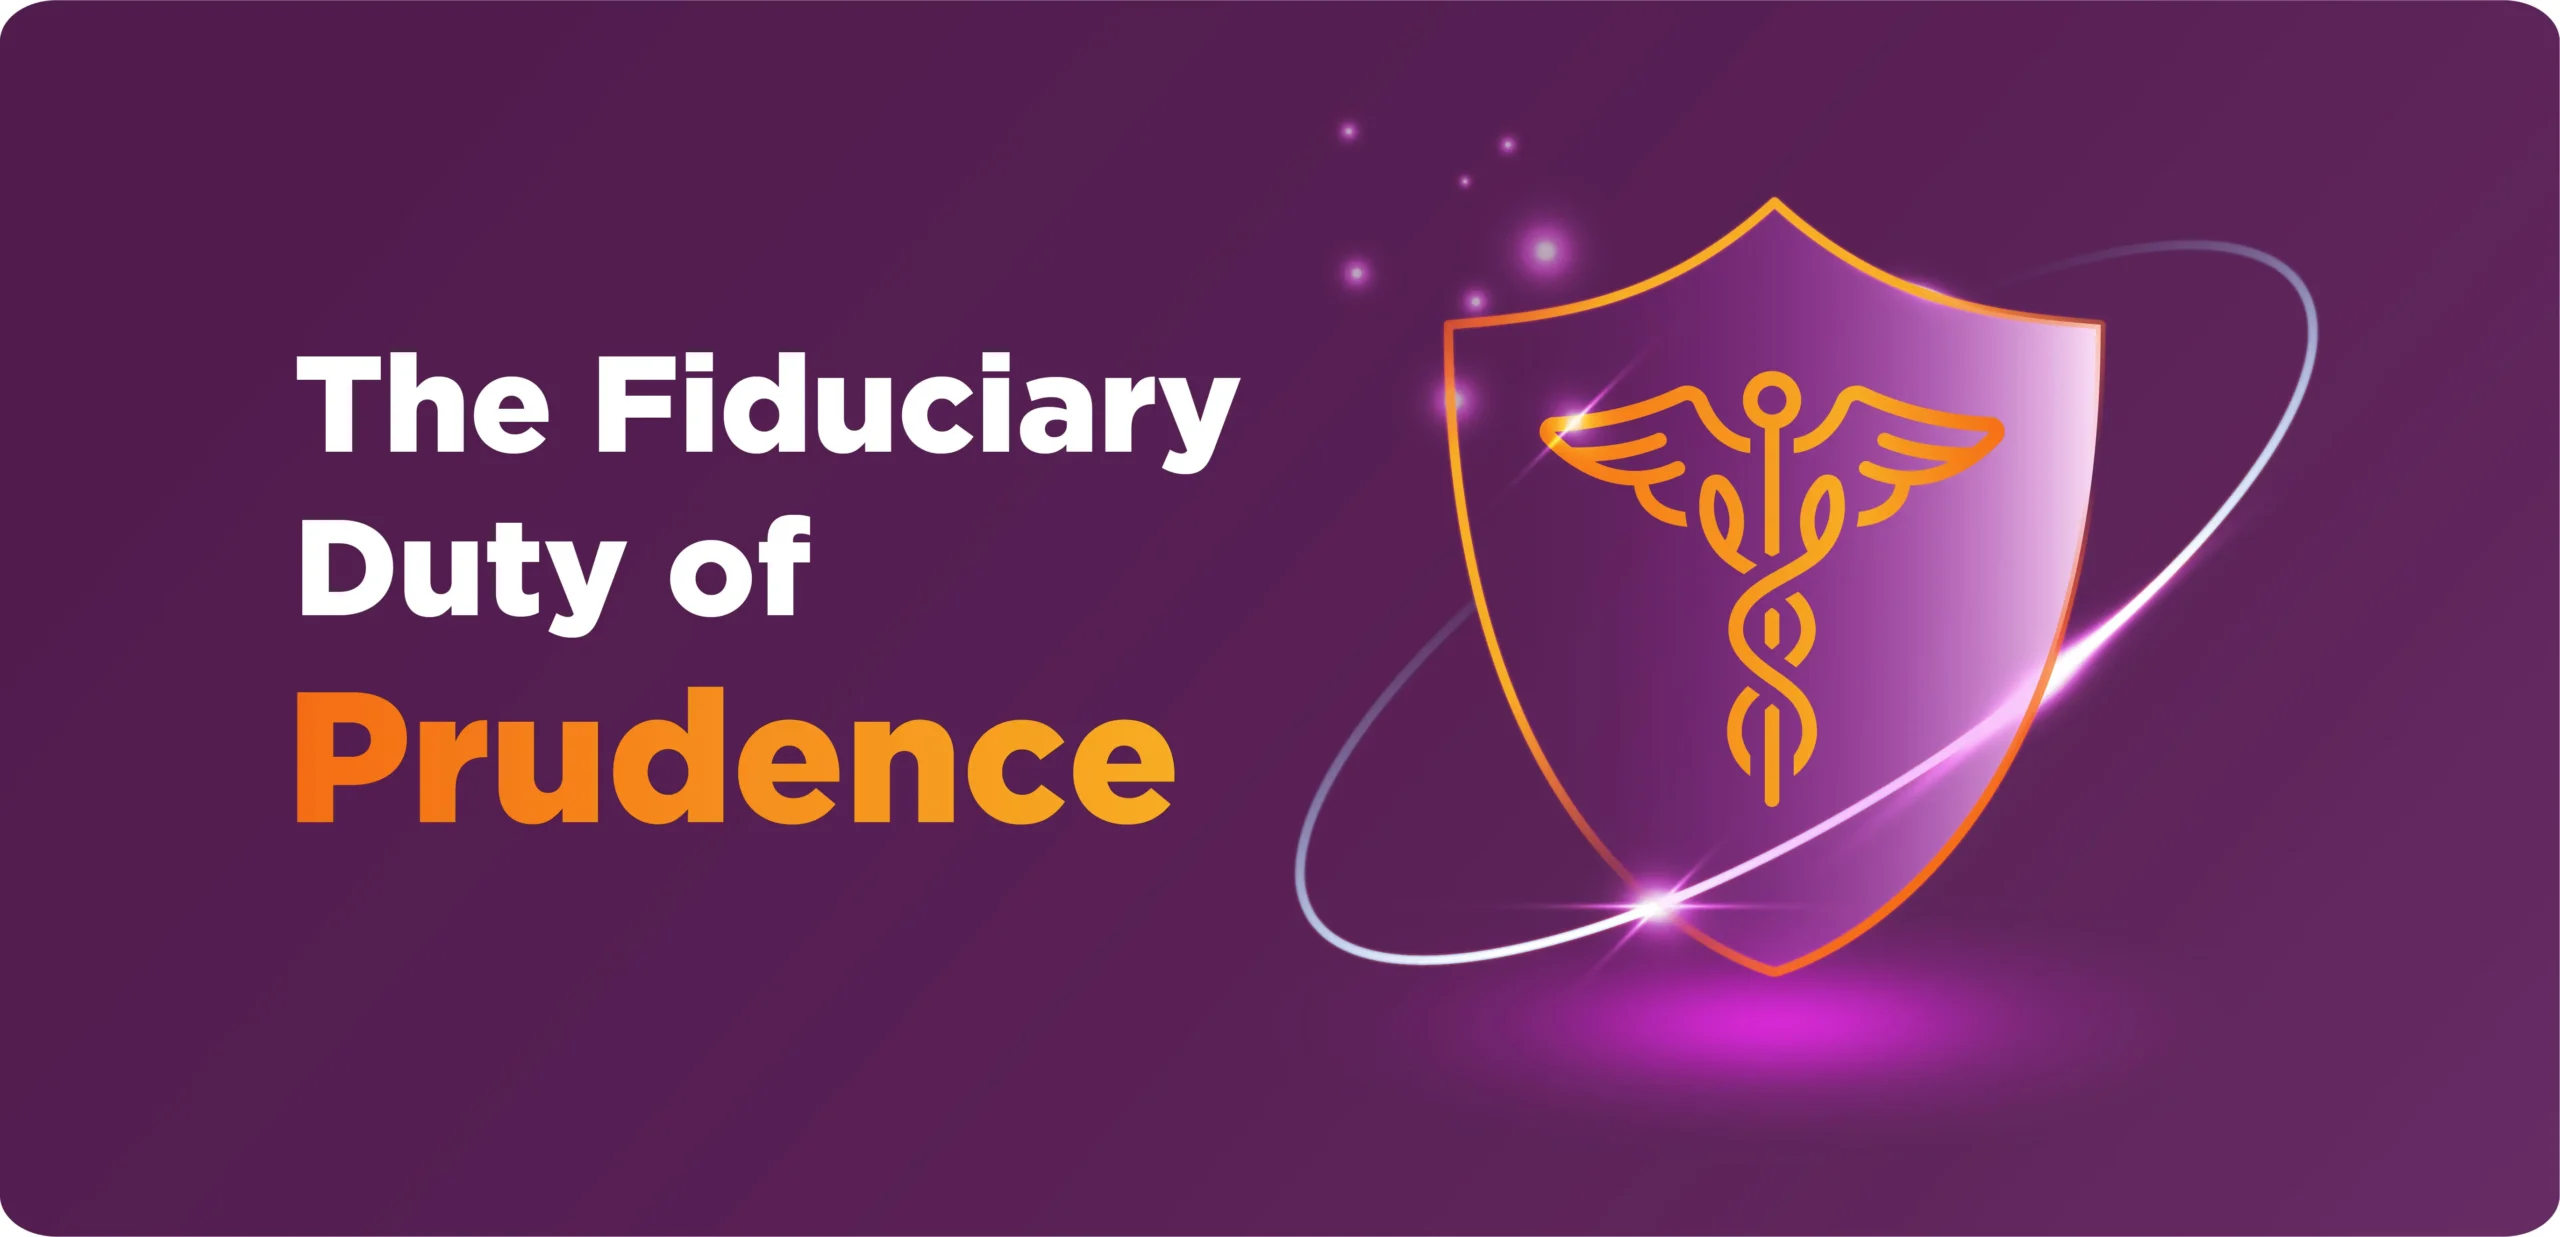 The Fiduciary Duty of Prudence